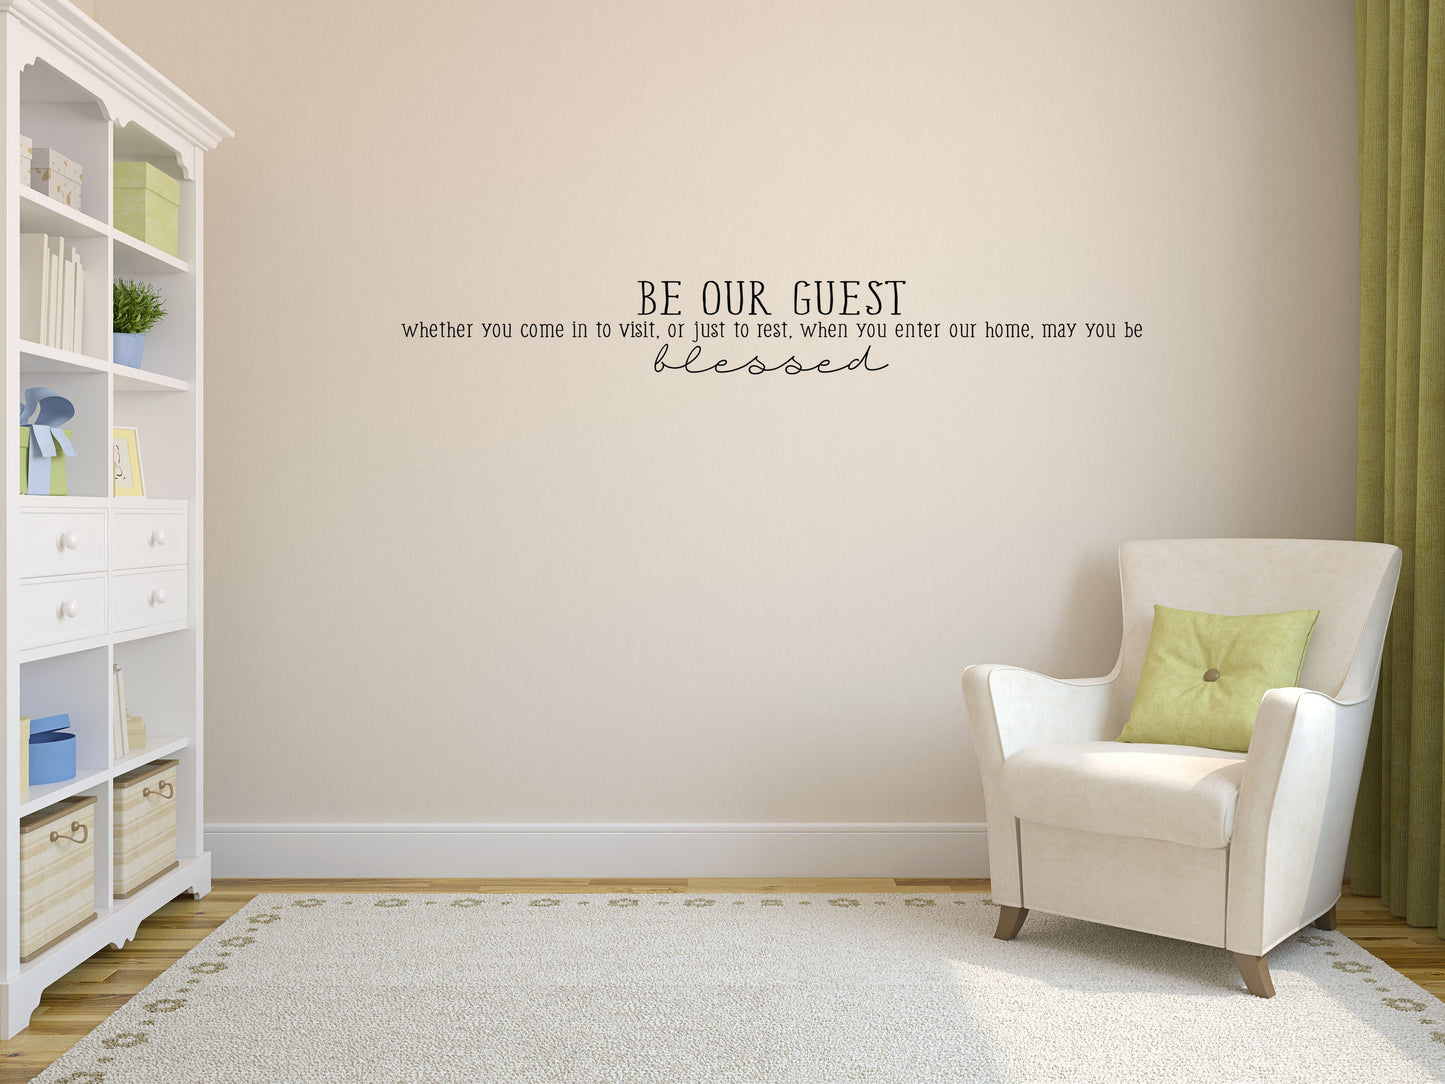 Be Our Guest - Guest Room Decor - Guest Room Wall Decal - Be Our Guest Home Decor - May You Be Blessed Wall Art Vinyl Wall Decal Inspirational Wall Signs 